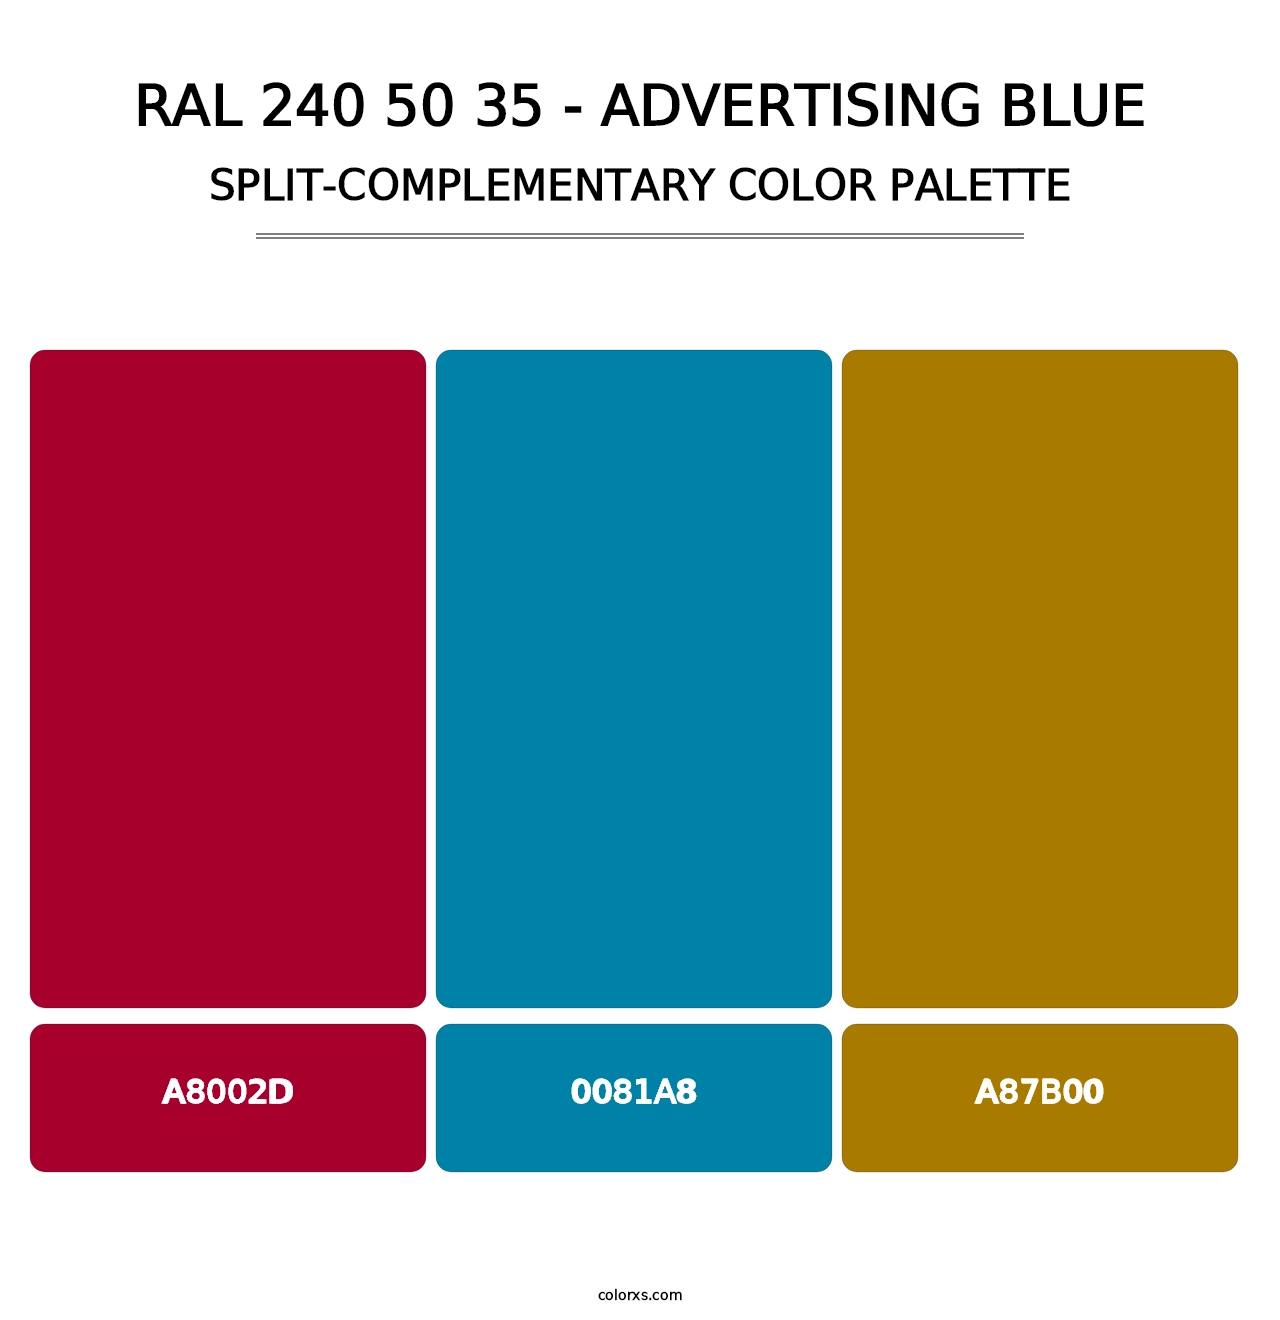 RAL 240 50 35 - Advertising Blue - Split-Complementary Color Palette